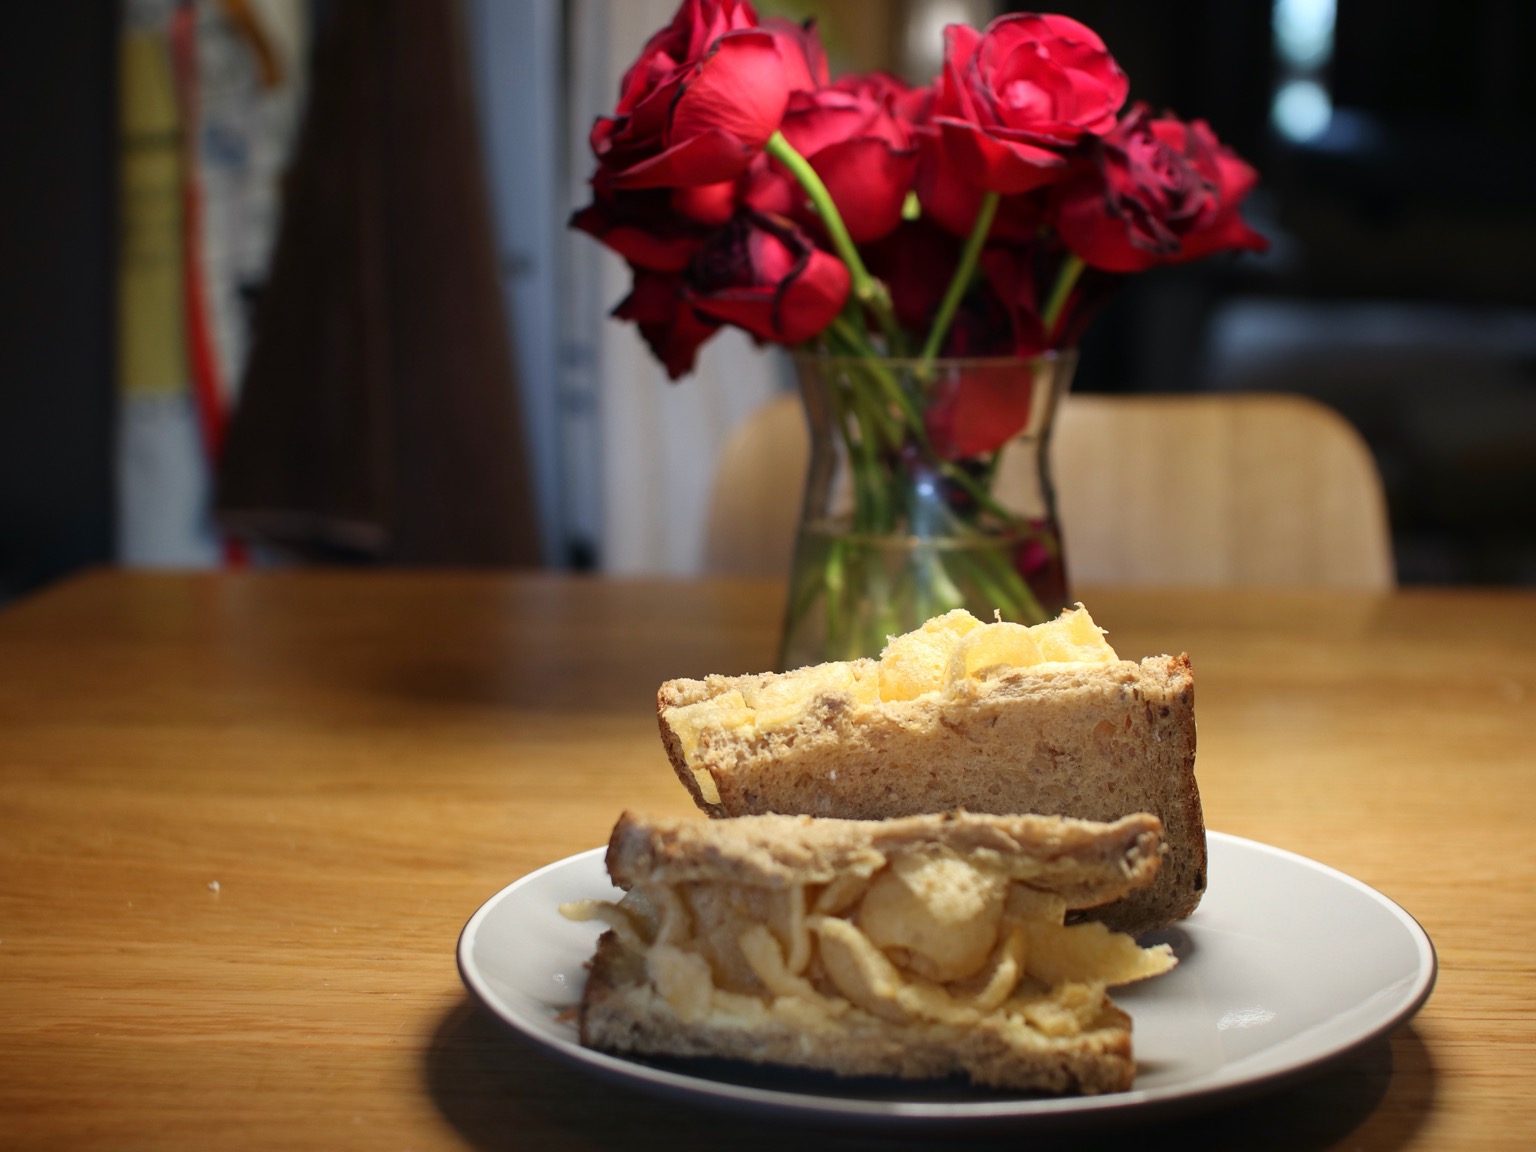 Halved brown Quavers sandwich in front of roses